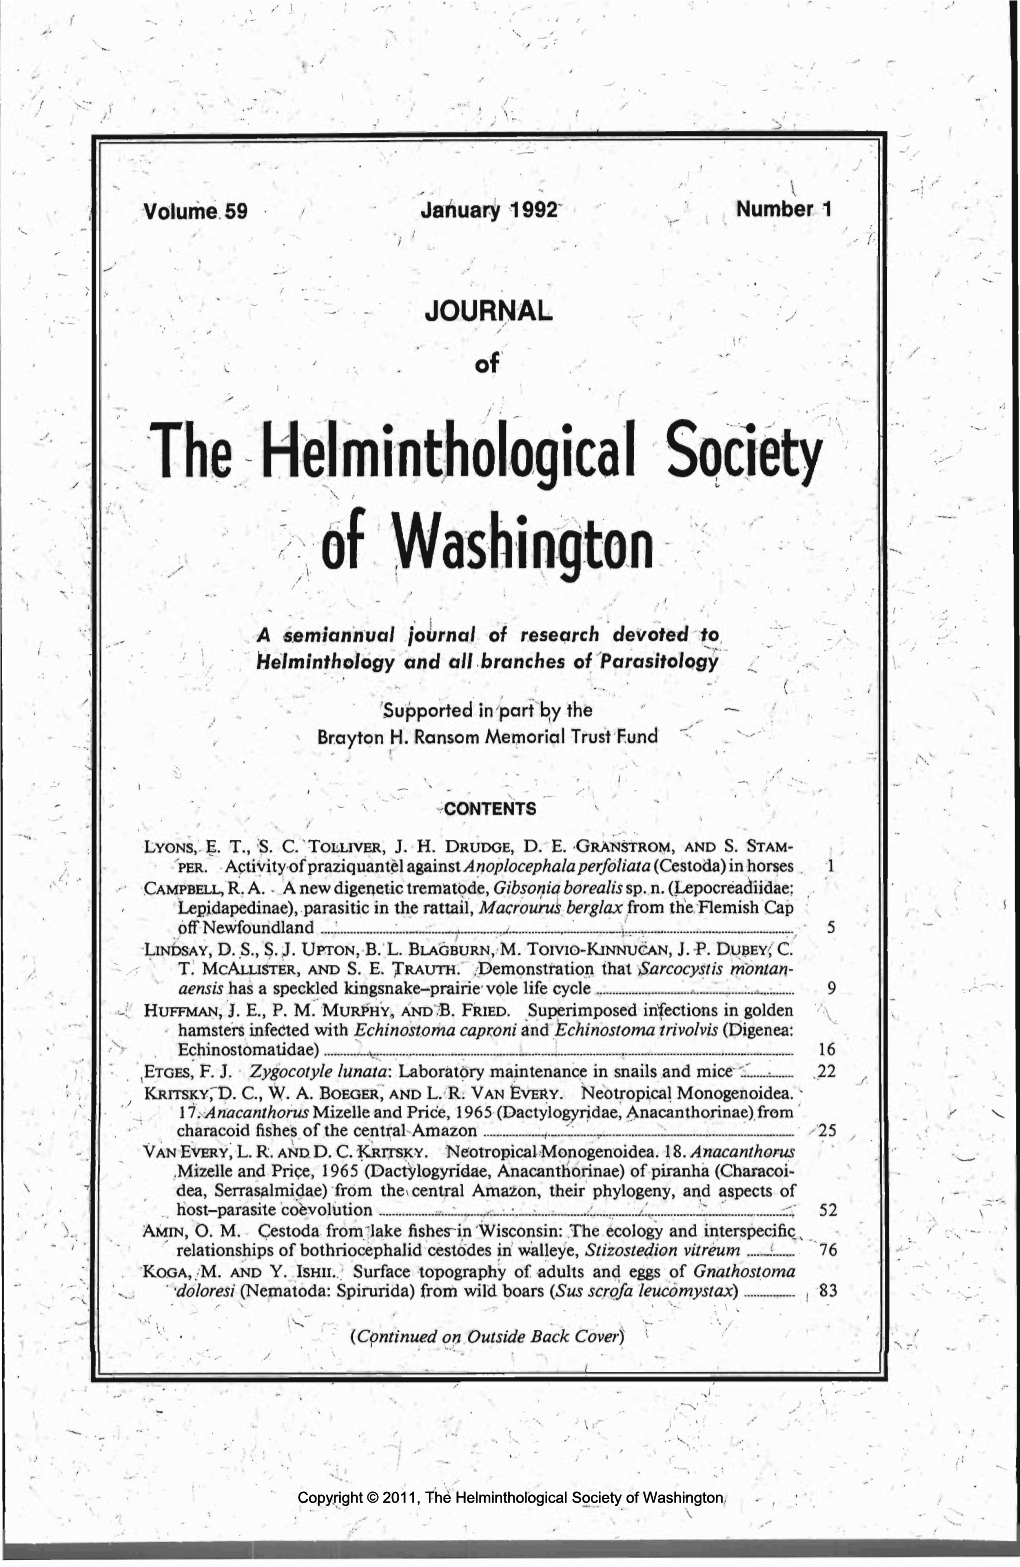 A Semiannual Journal of Research Devoted to Helminthology and All Branches of Parasitology